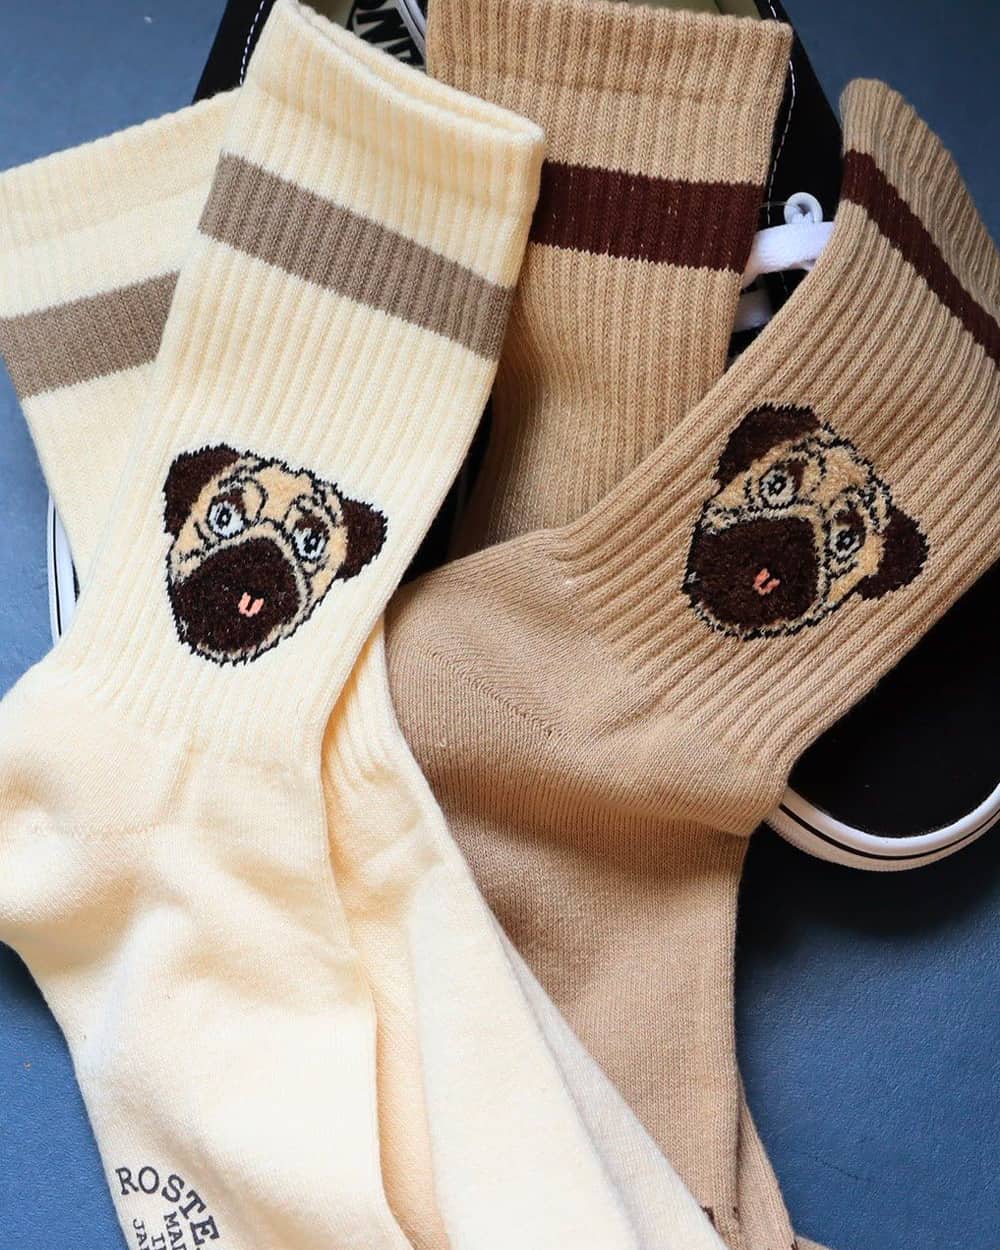 Two pairs of men's Rostersox socks with pug dog face prints in cream and brown